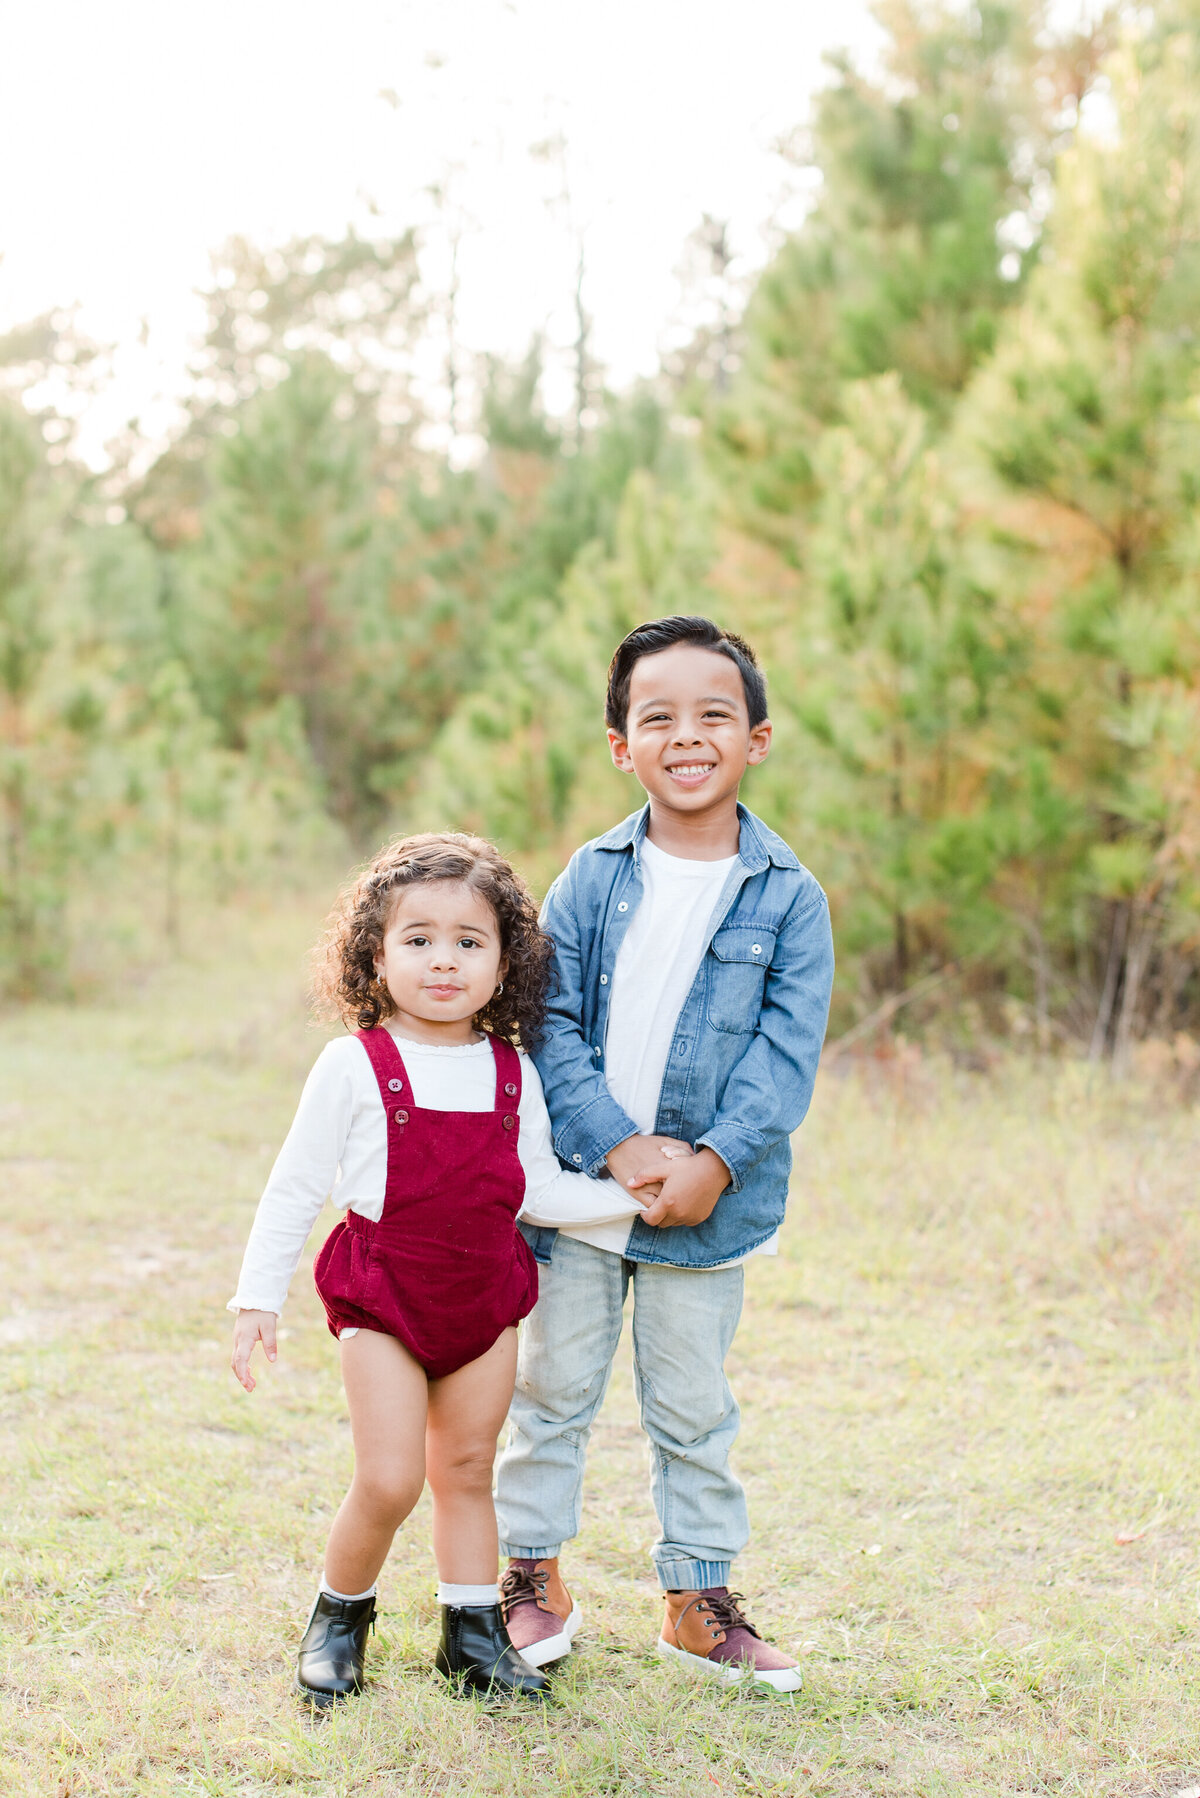 siblings boy and girl holding hands burgindy  romper and denim jacket